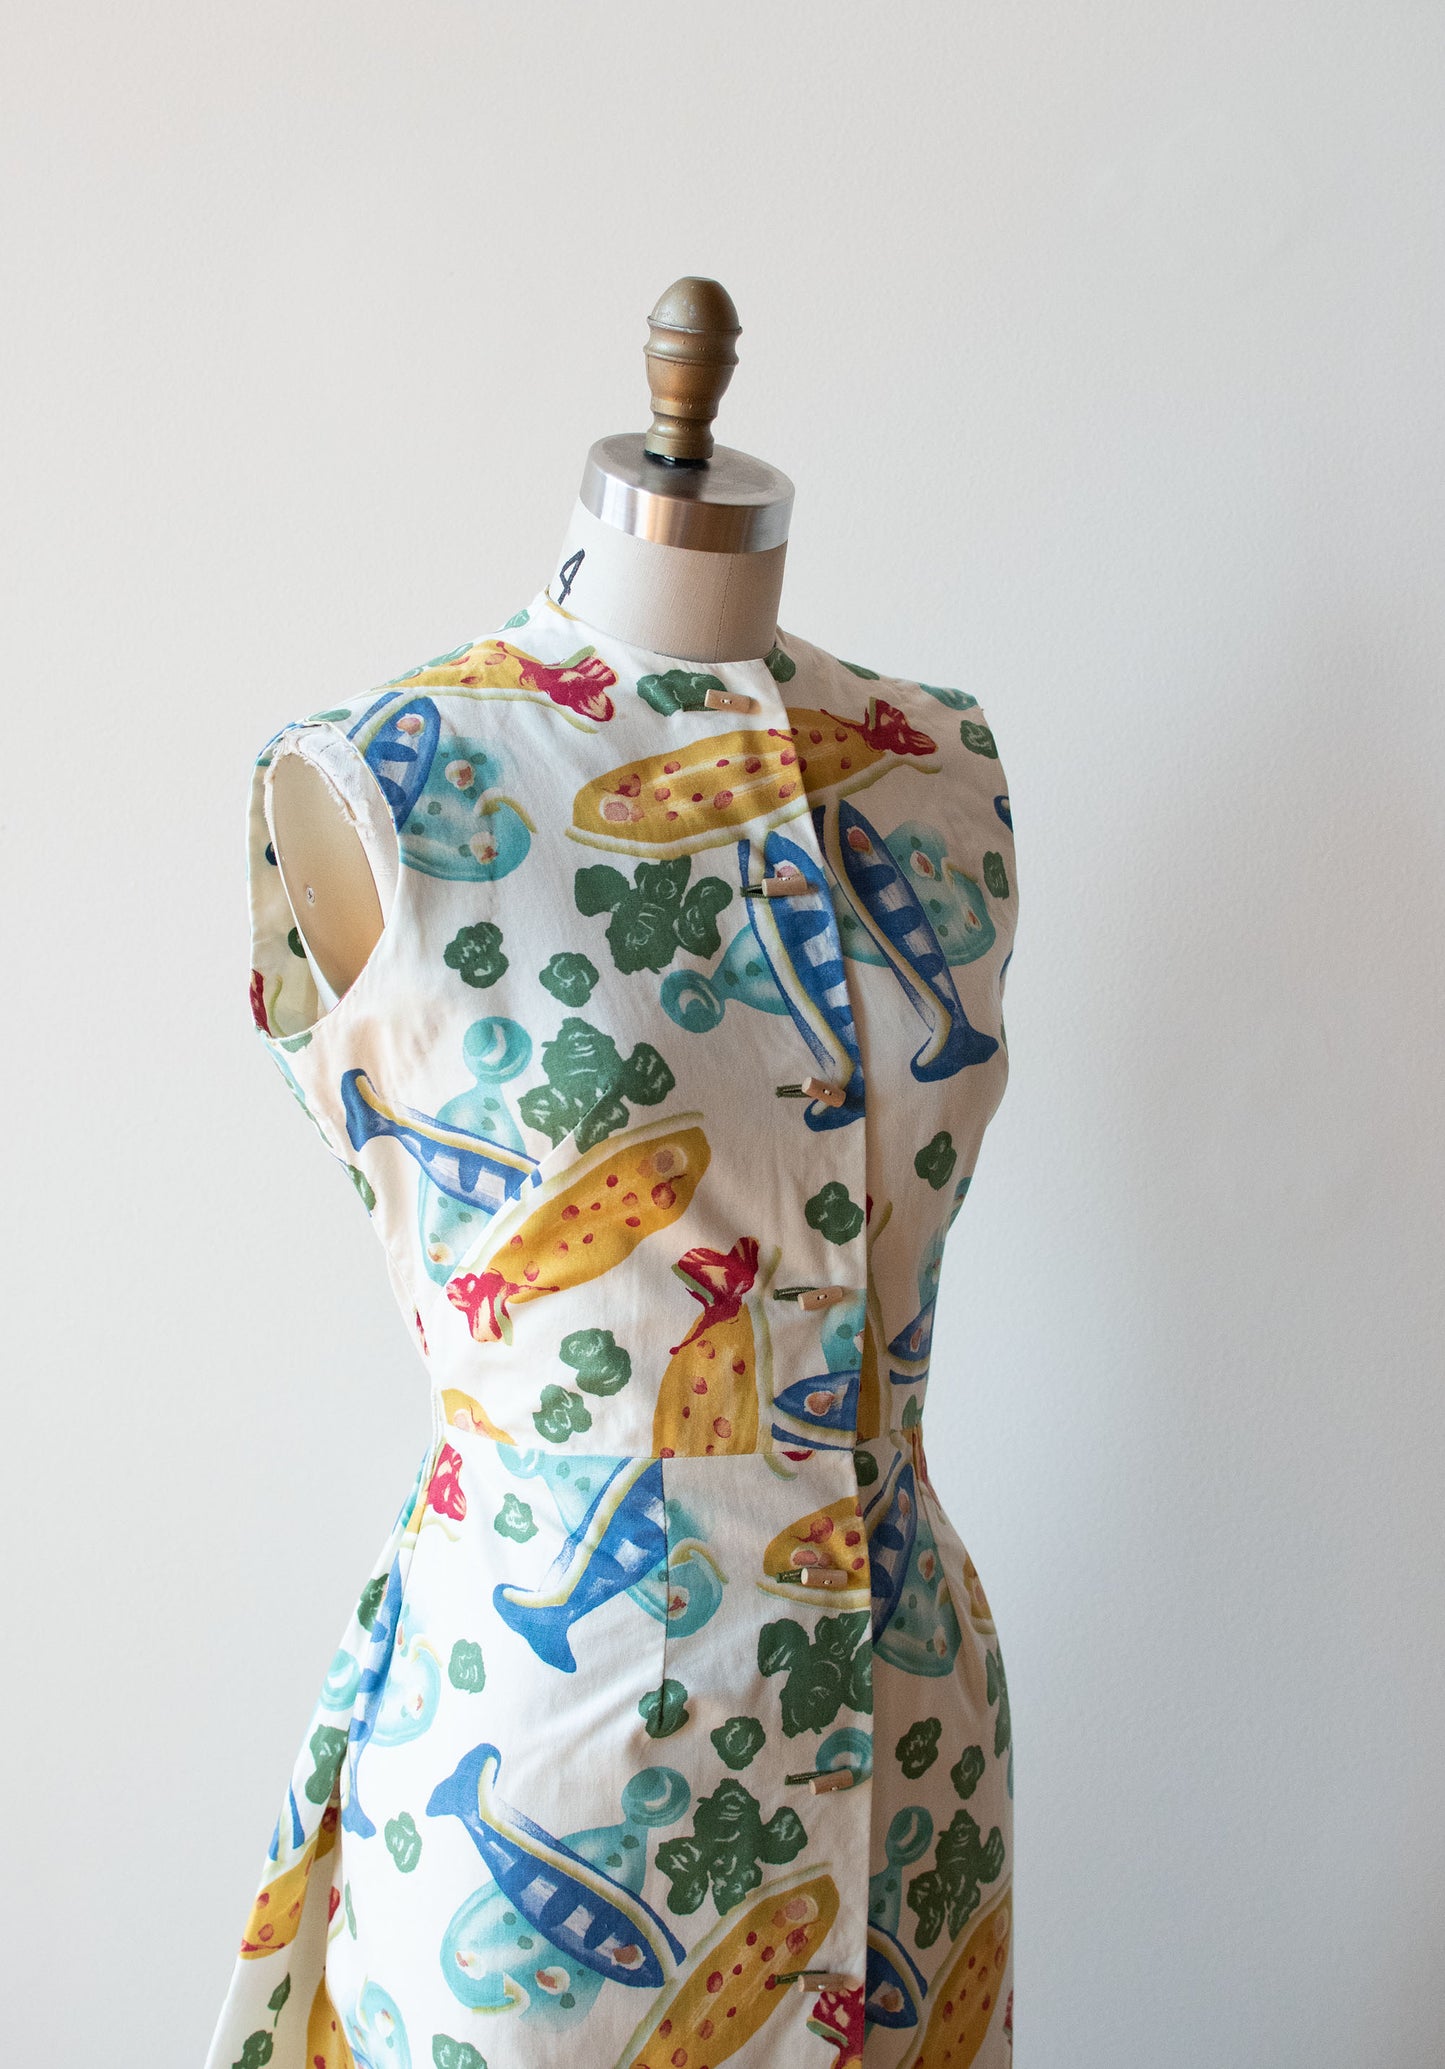 Modern Master's Picasso "Fish" Print Dress | Claire McCardell 1955